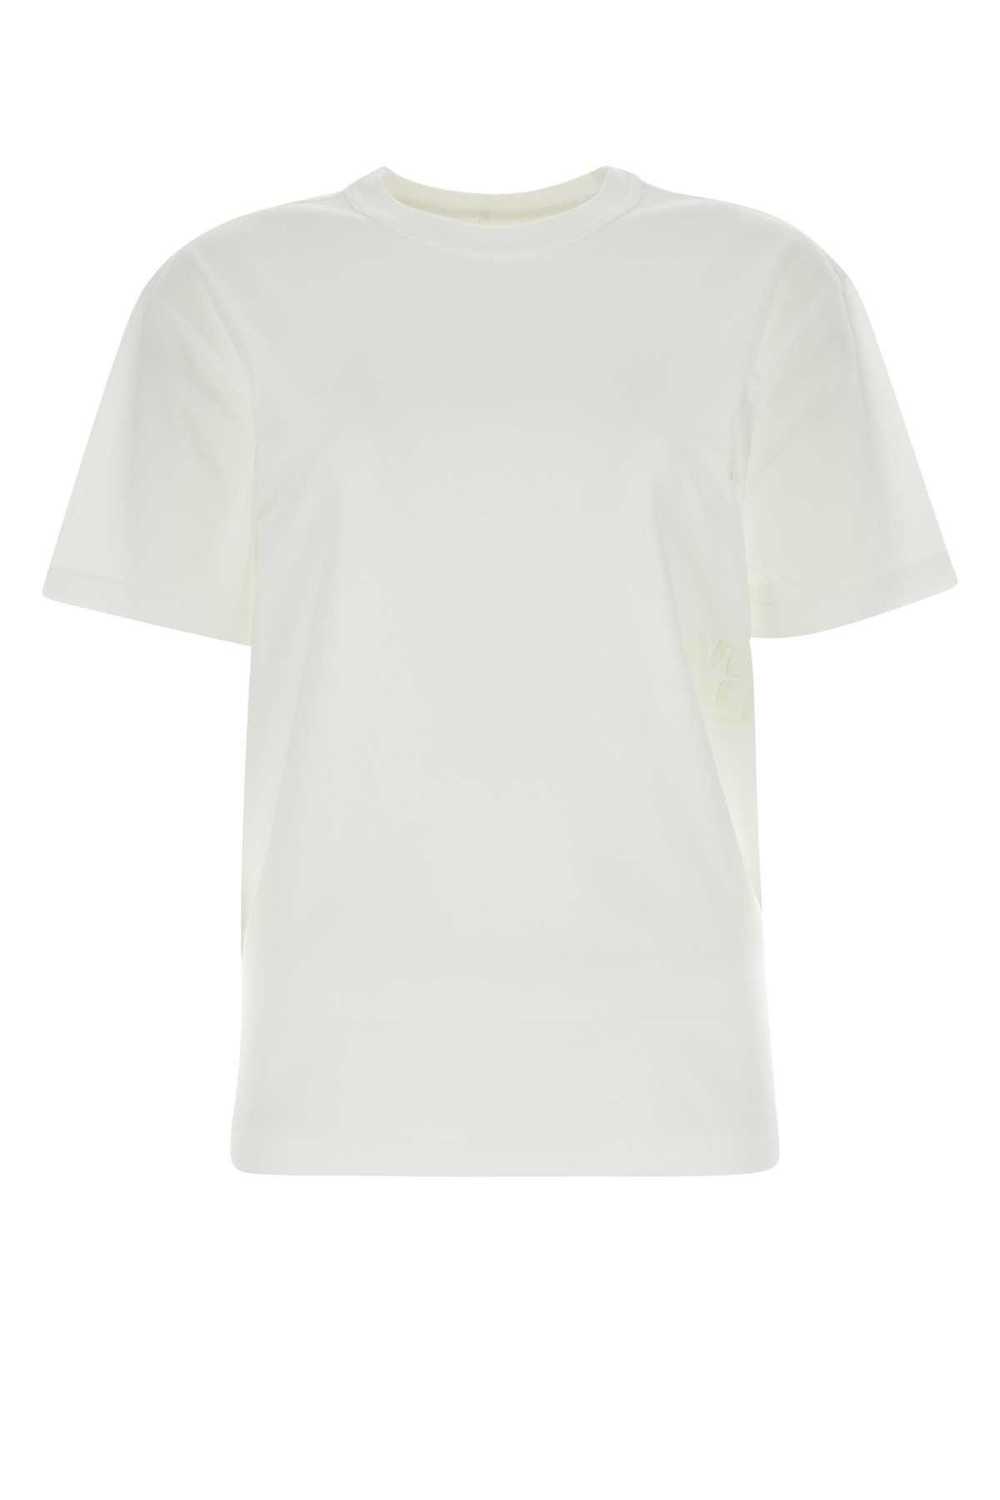 T by Alexander Wang White Cotton T-Shirt - image 1